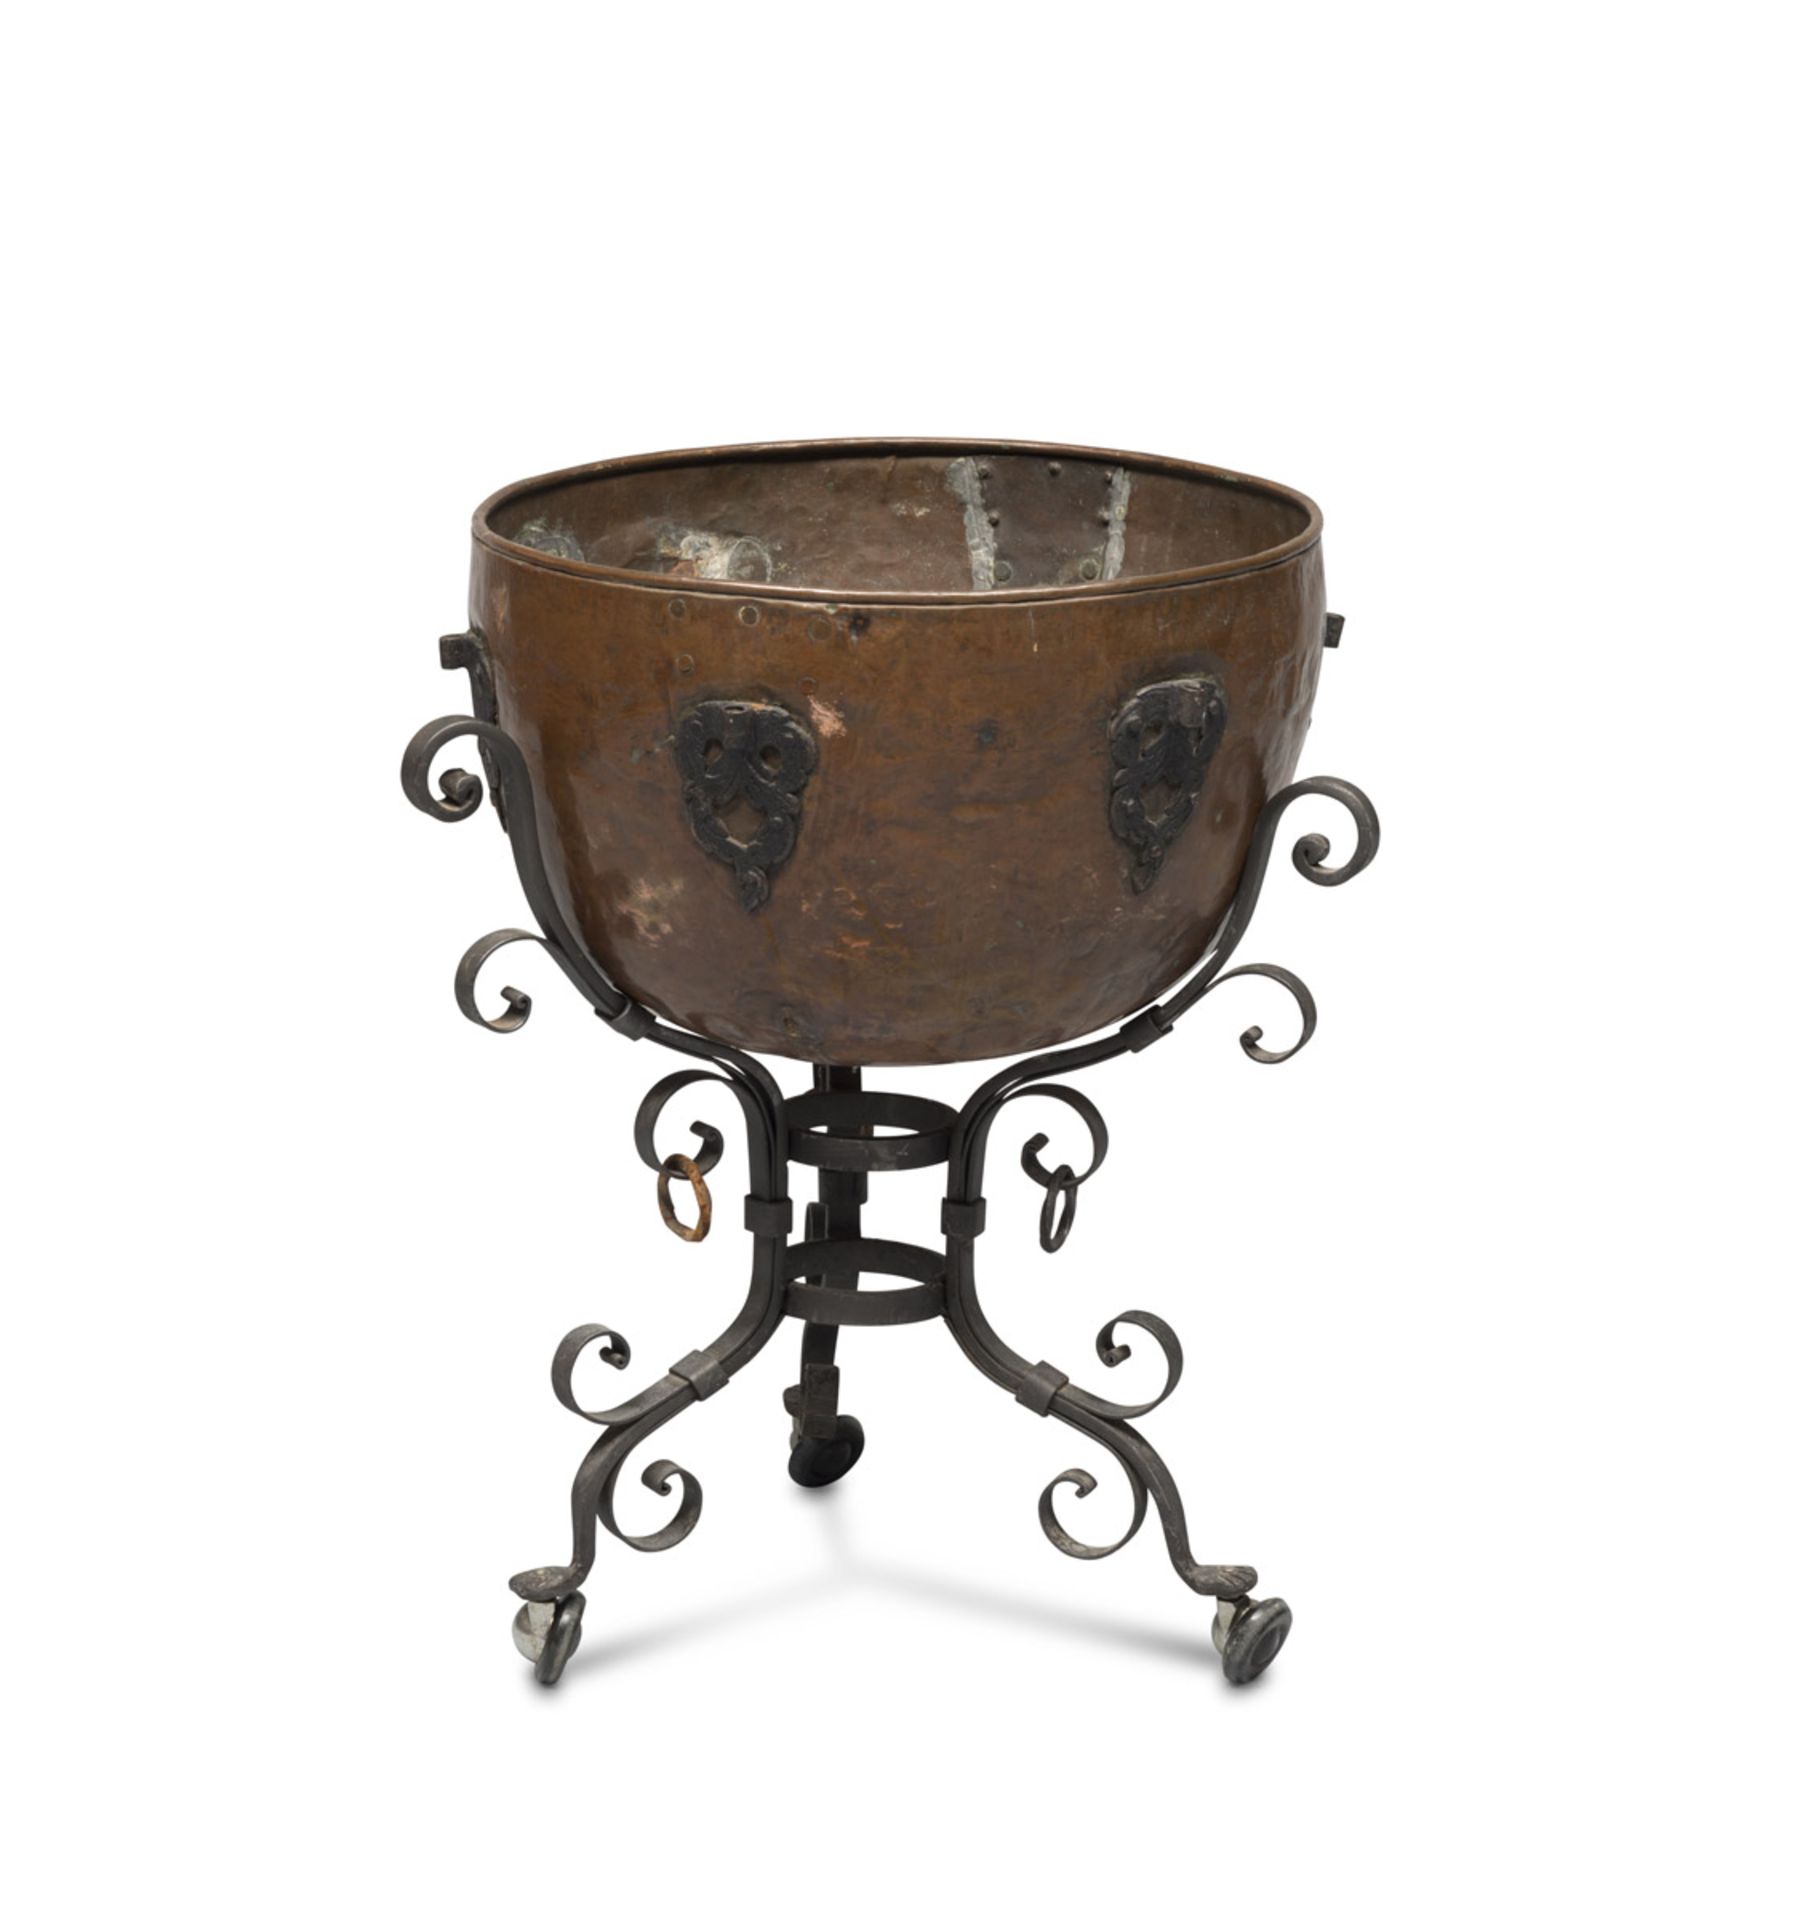 COPPER POT, VENETIAN, LATE 16TH CENTURY with supports to the body for suspension in wrought iron.